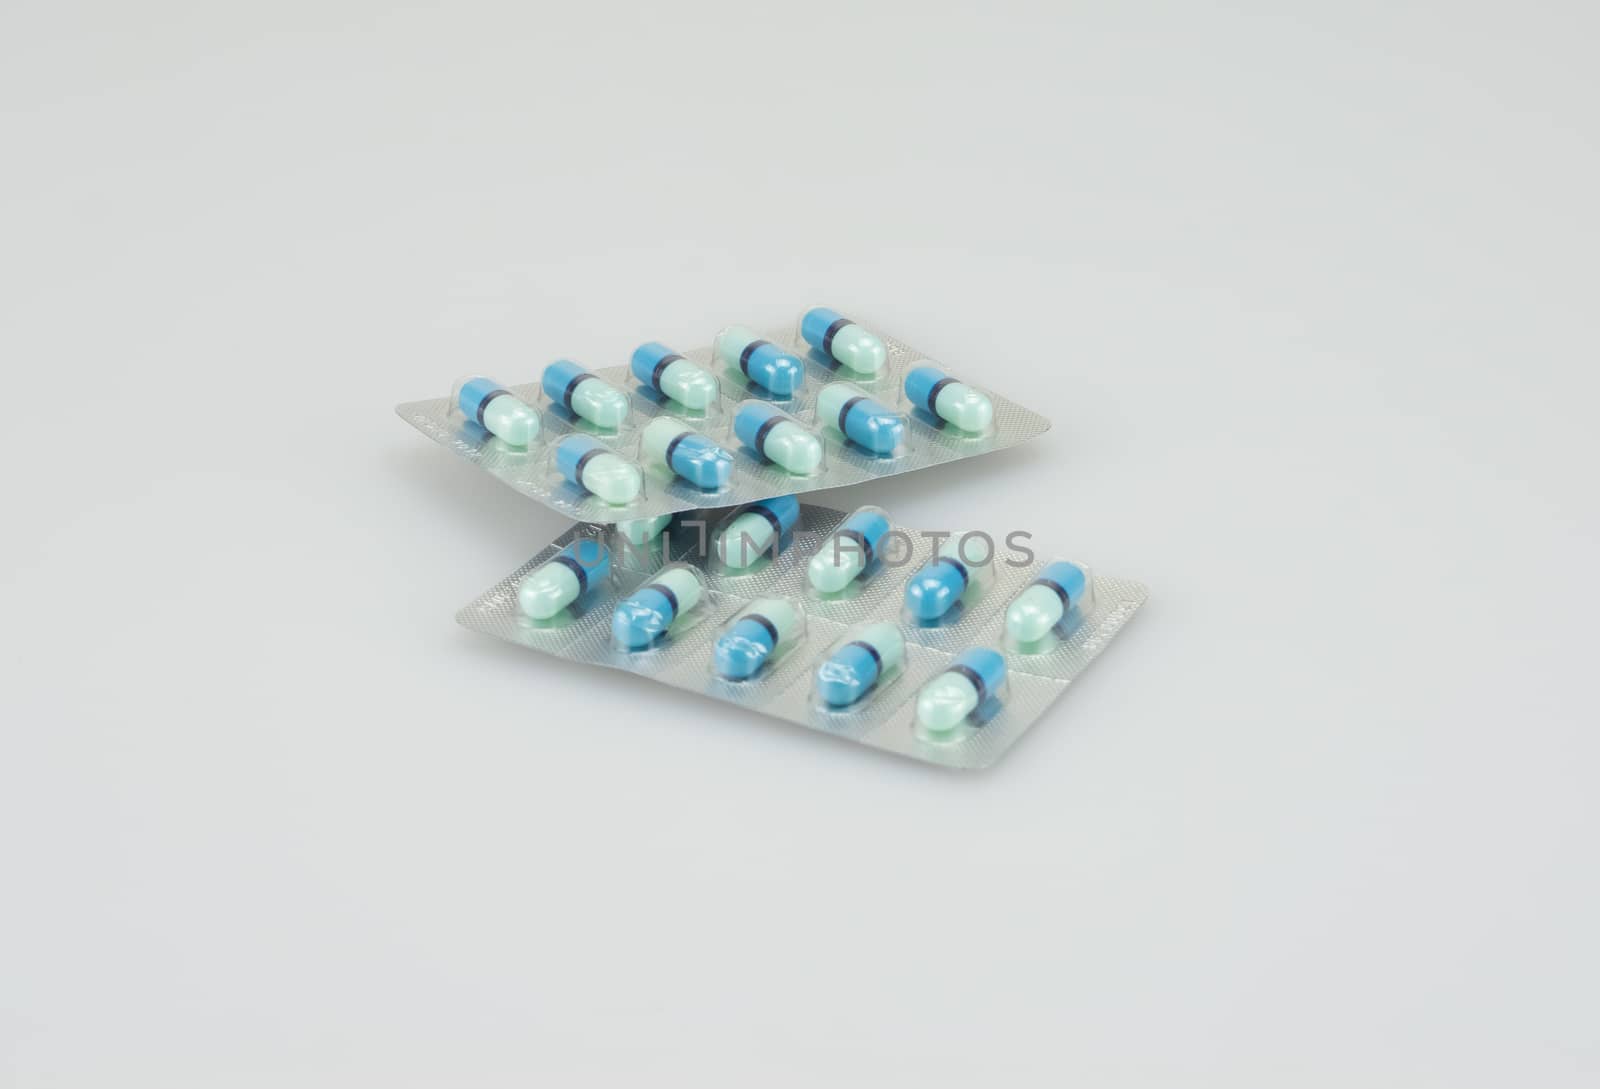 Two packing of blue medical capsules was placed on white background.